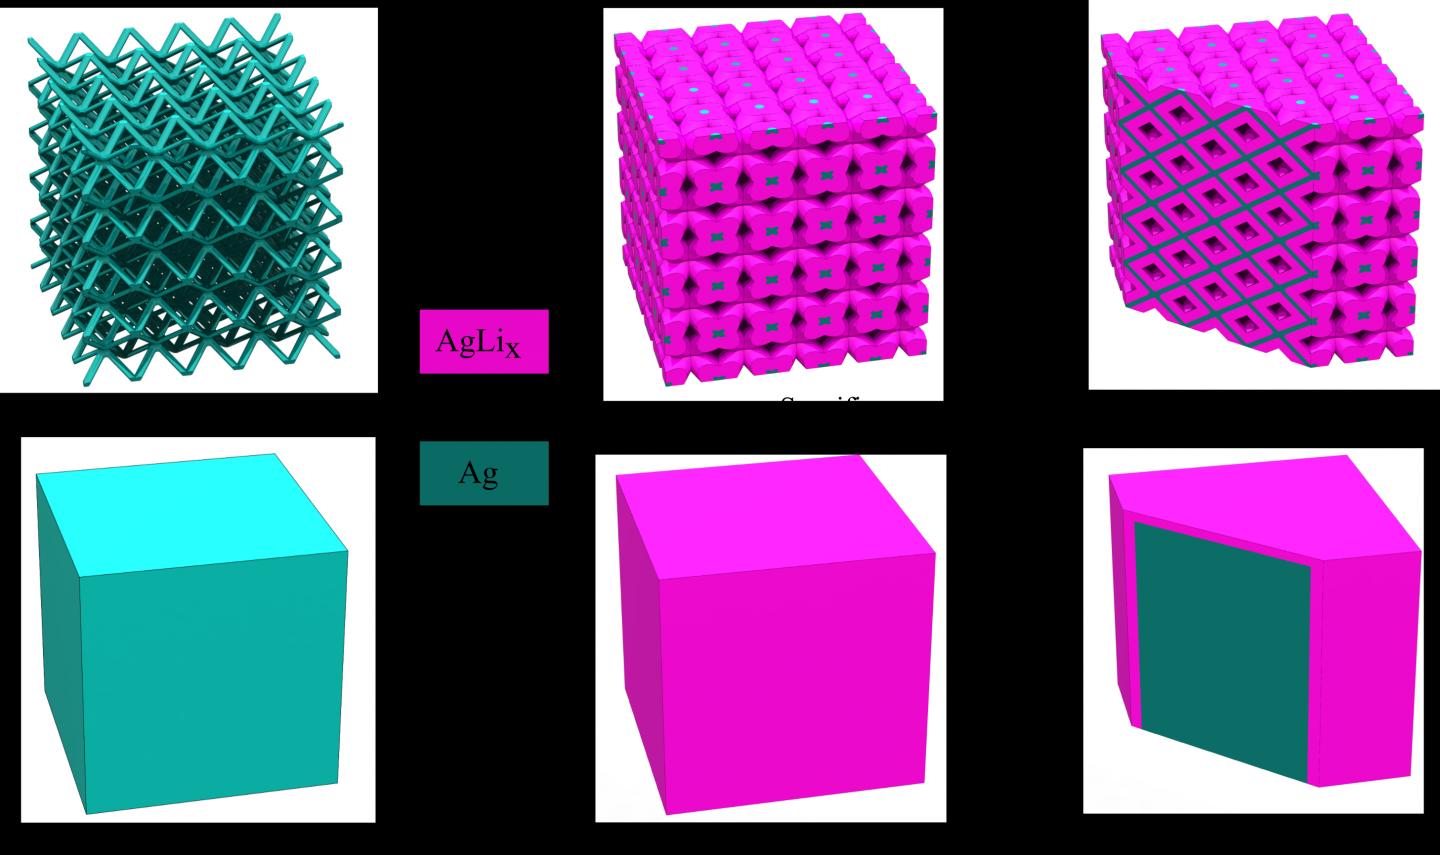 Lattice architecture can provide channels for effective transportation of electrolyte inside the volume of material, while for the cube electrode, most of the material will not be exposed to the electrolyte. Source: Rahul Panat, Carnegie Mellon University College of Engineering